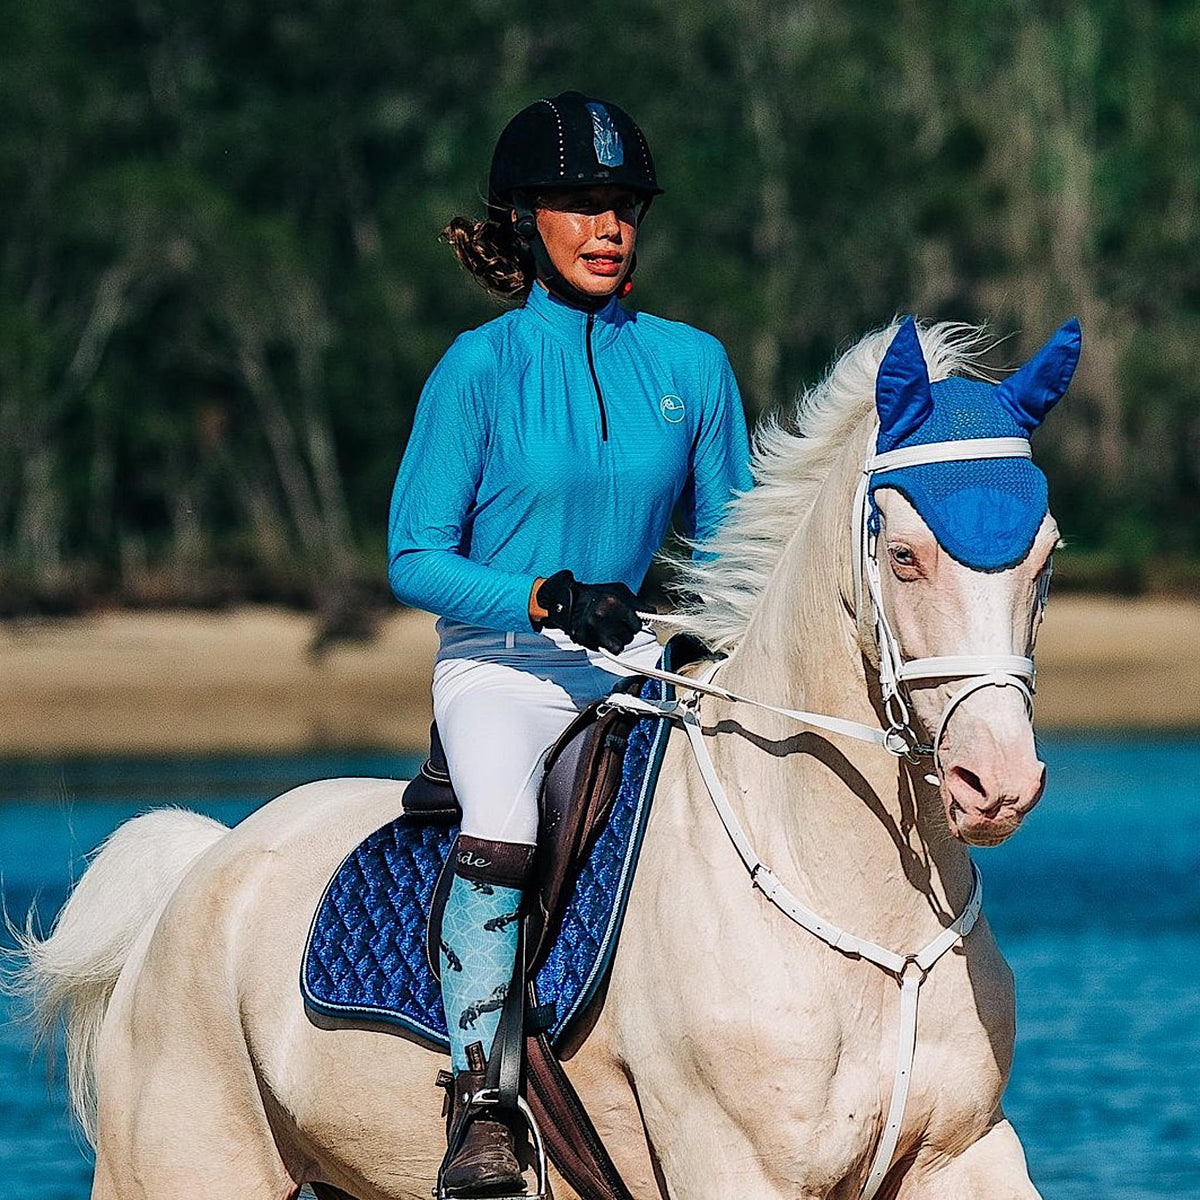 Cremello horse being ridden by rider in blue long sleeve shirt.